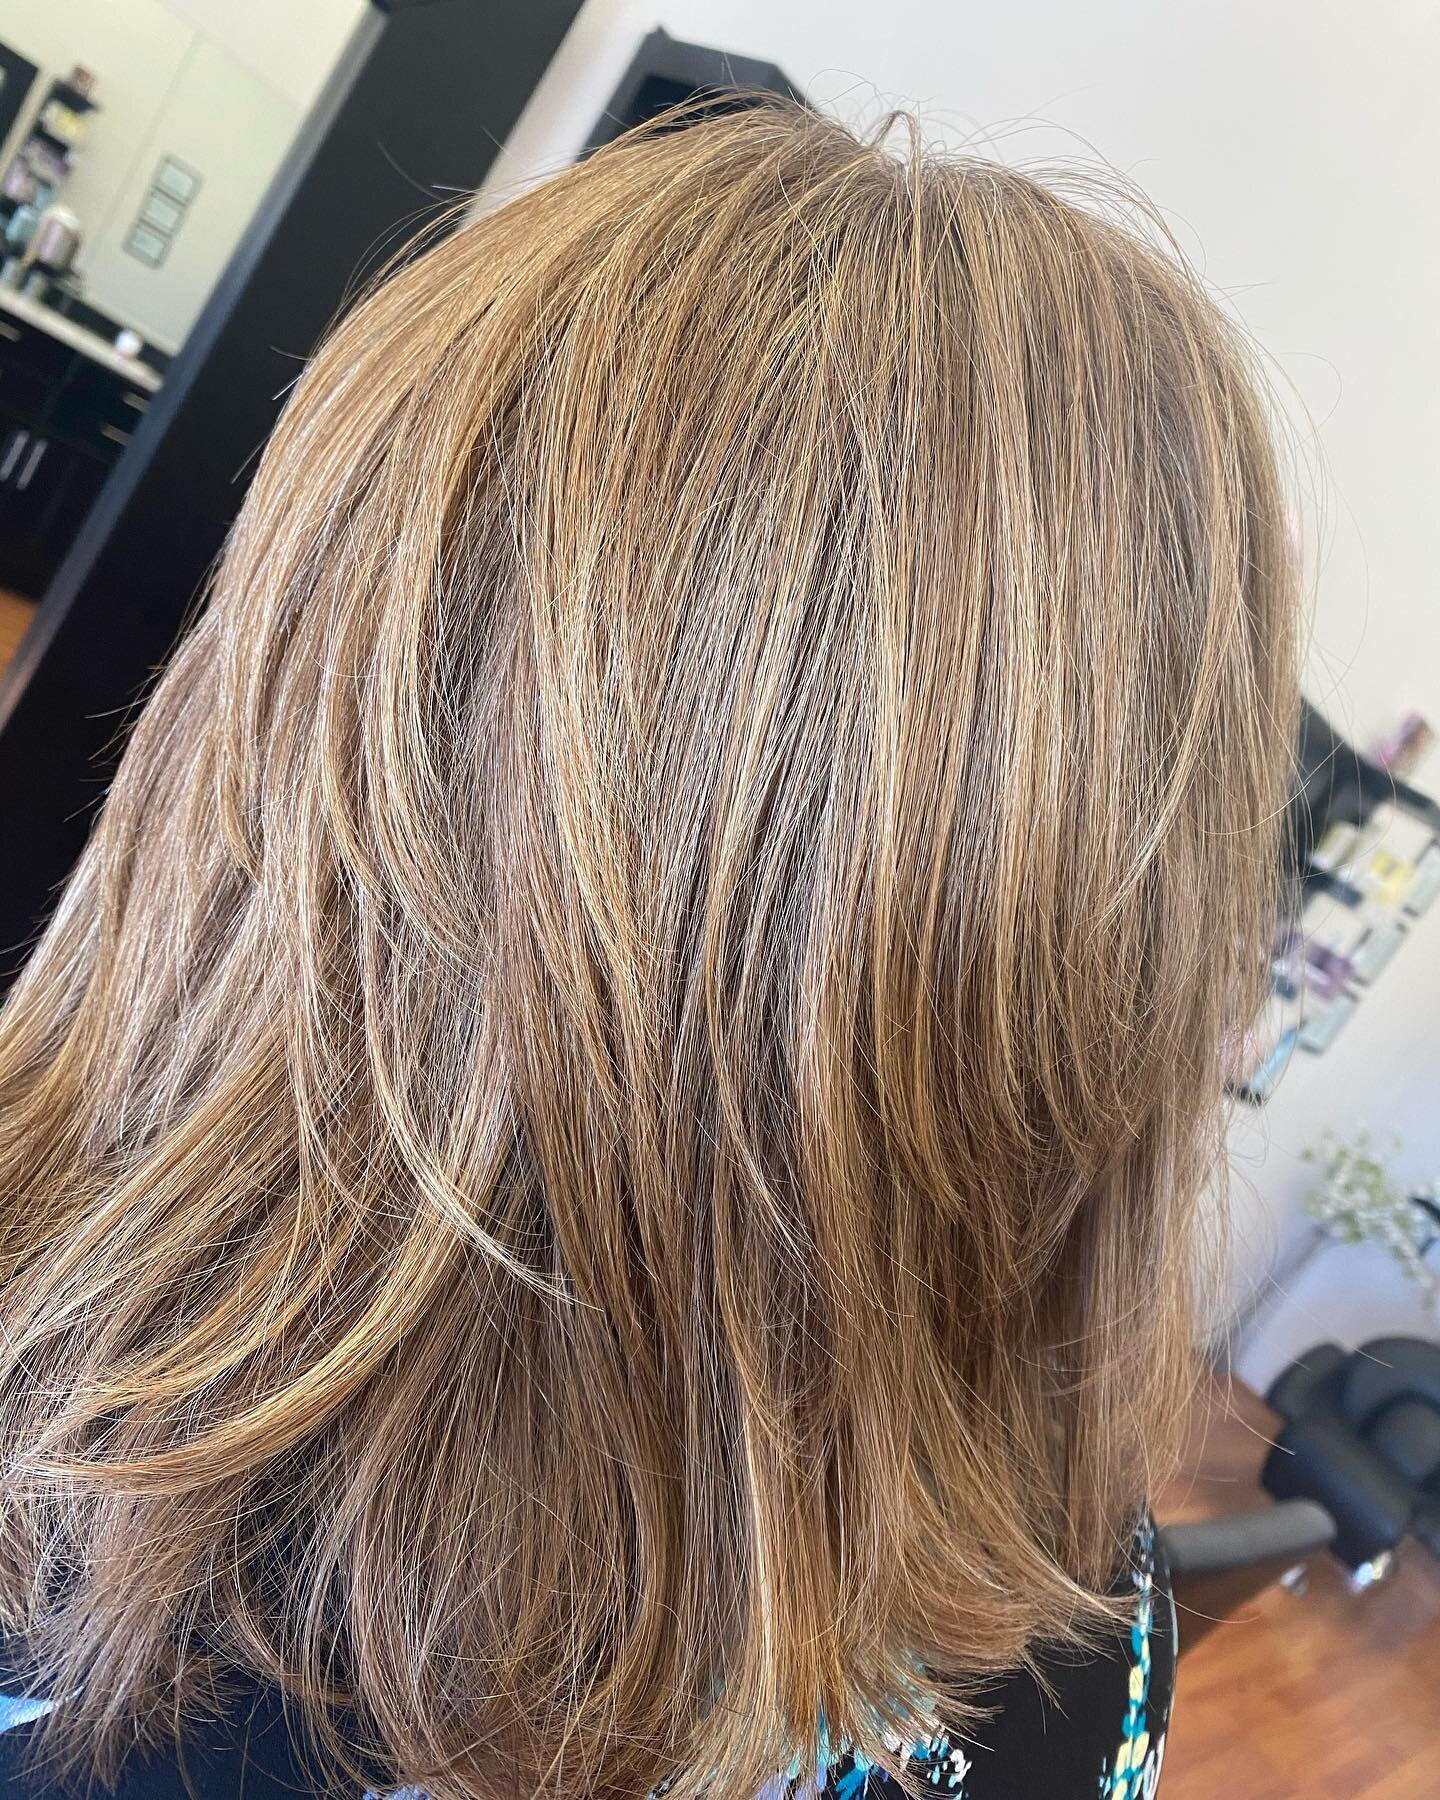 Let&rsquo;s talk Foil Hilights: 

Hilights is not one standard application for all. We can control how blonde the hair gets  over time. 
It is all based on how often you want to maintain and what your desired look is.

▪️1st photo: hilights once a ye